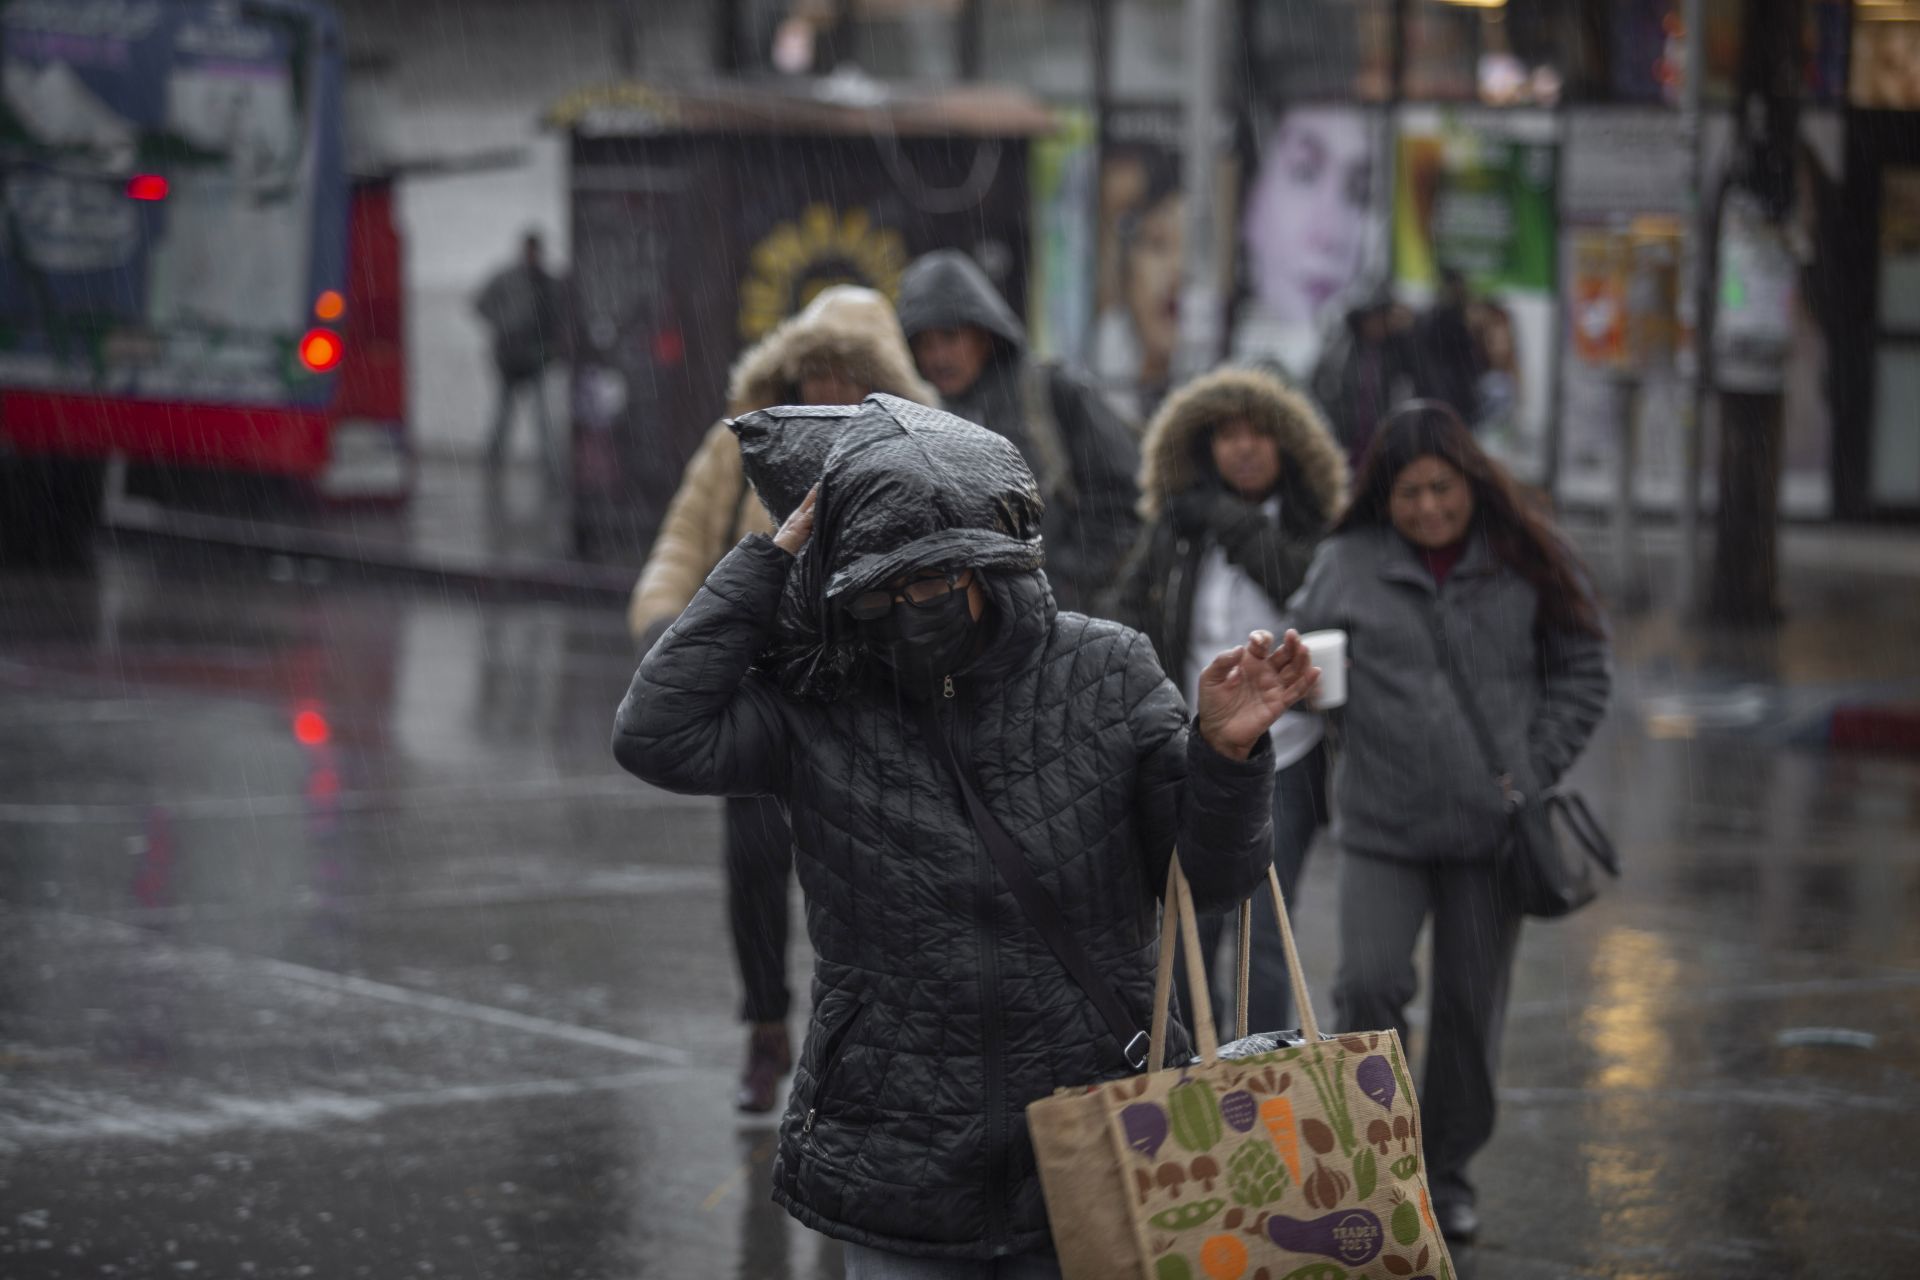 Cold front 18 will cause low temperatures in the country